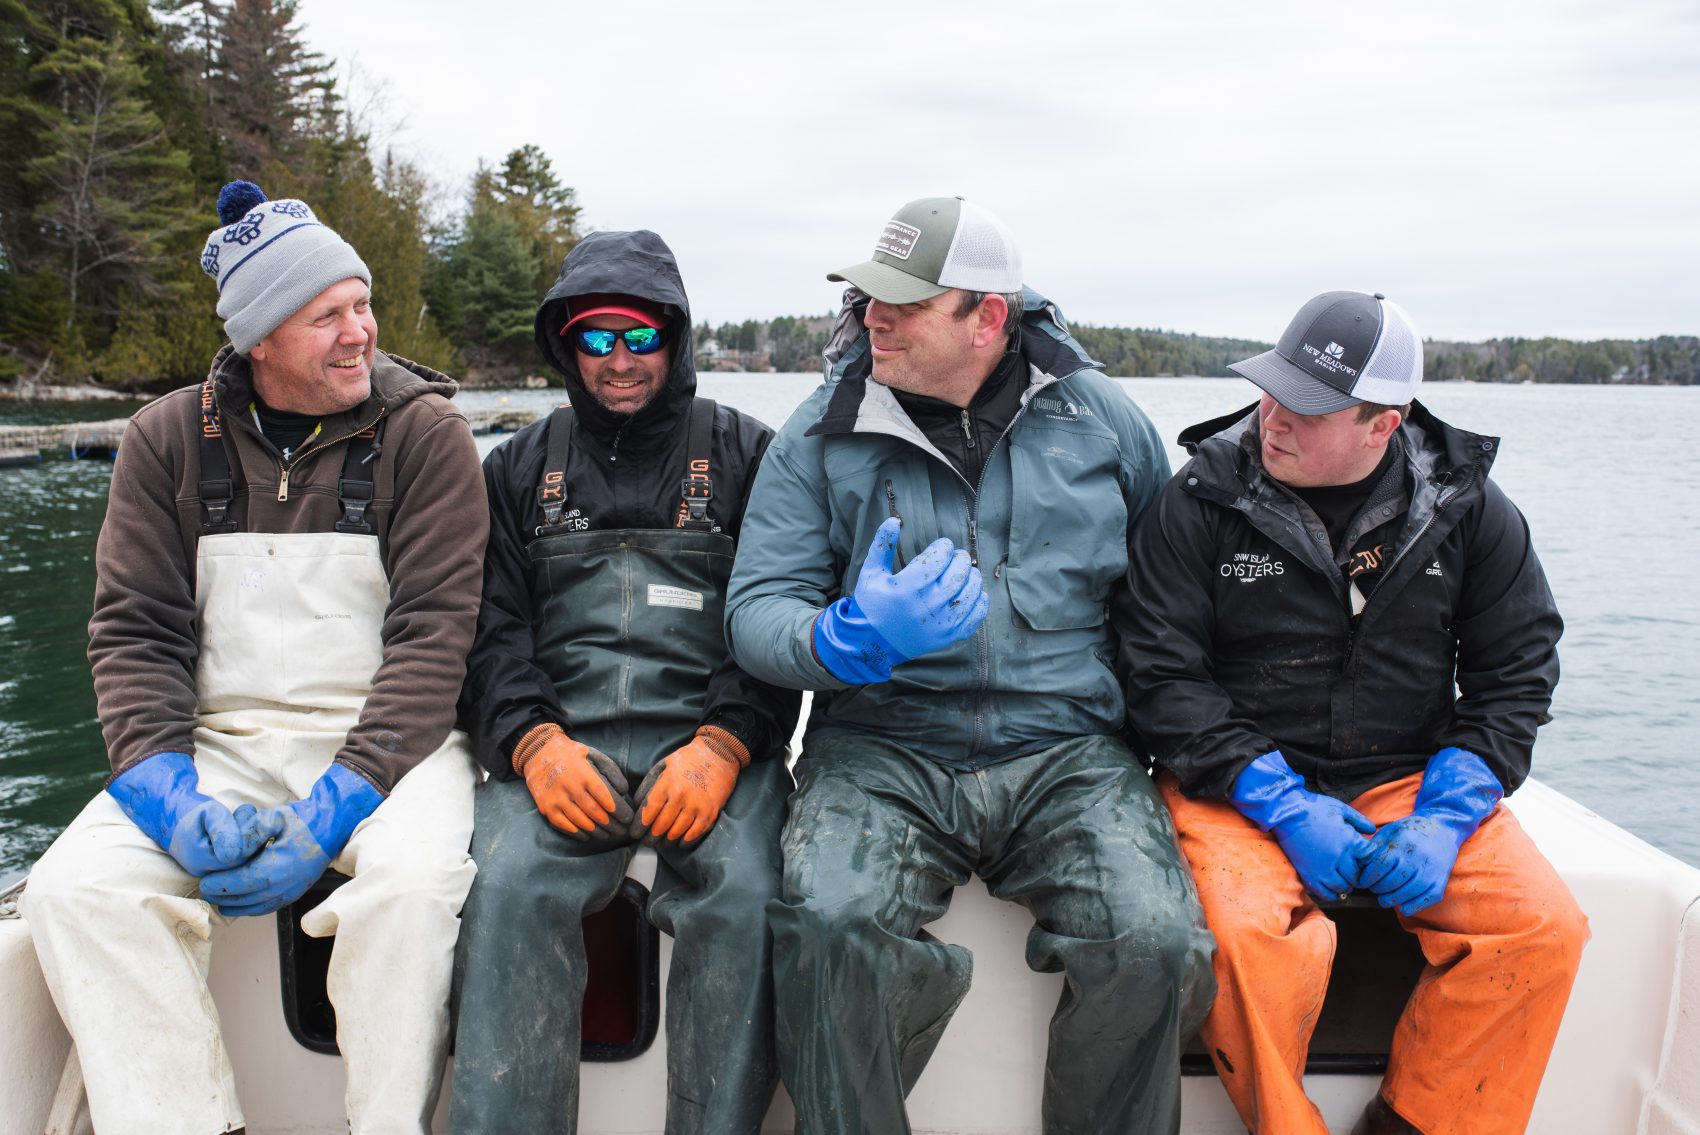 Peter, Donnie, Dave and Alec of Snow Island Oysters sit next to one another on the bow of their boat.